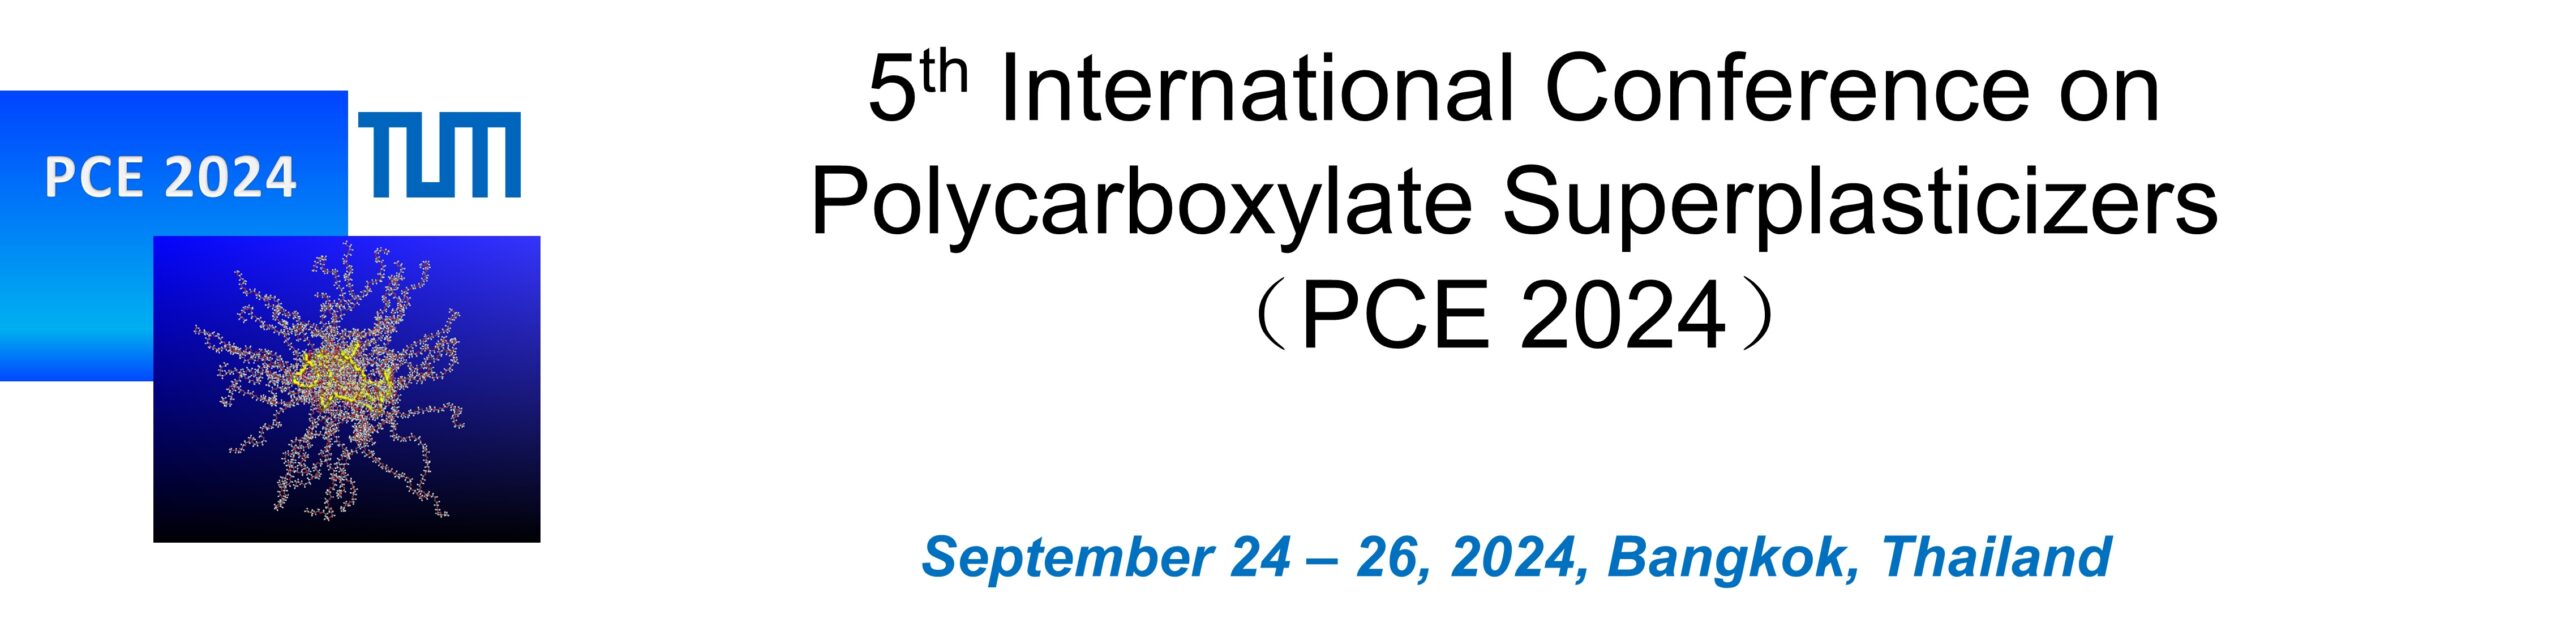 5th International Conference on Polycarboxylate Superplasticizers